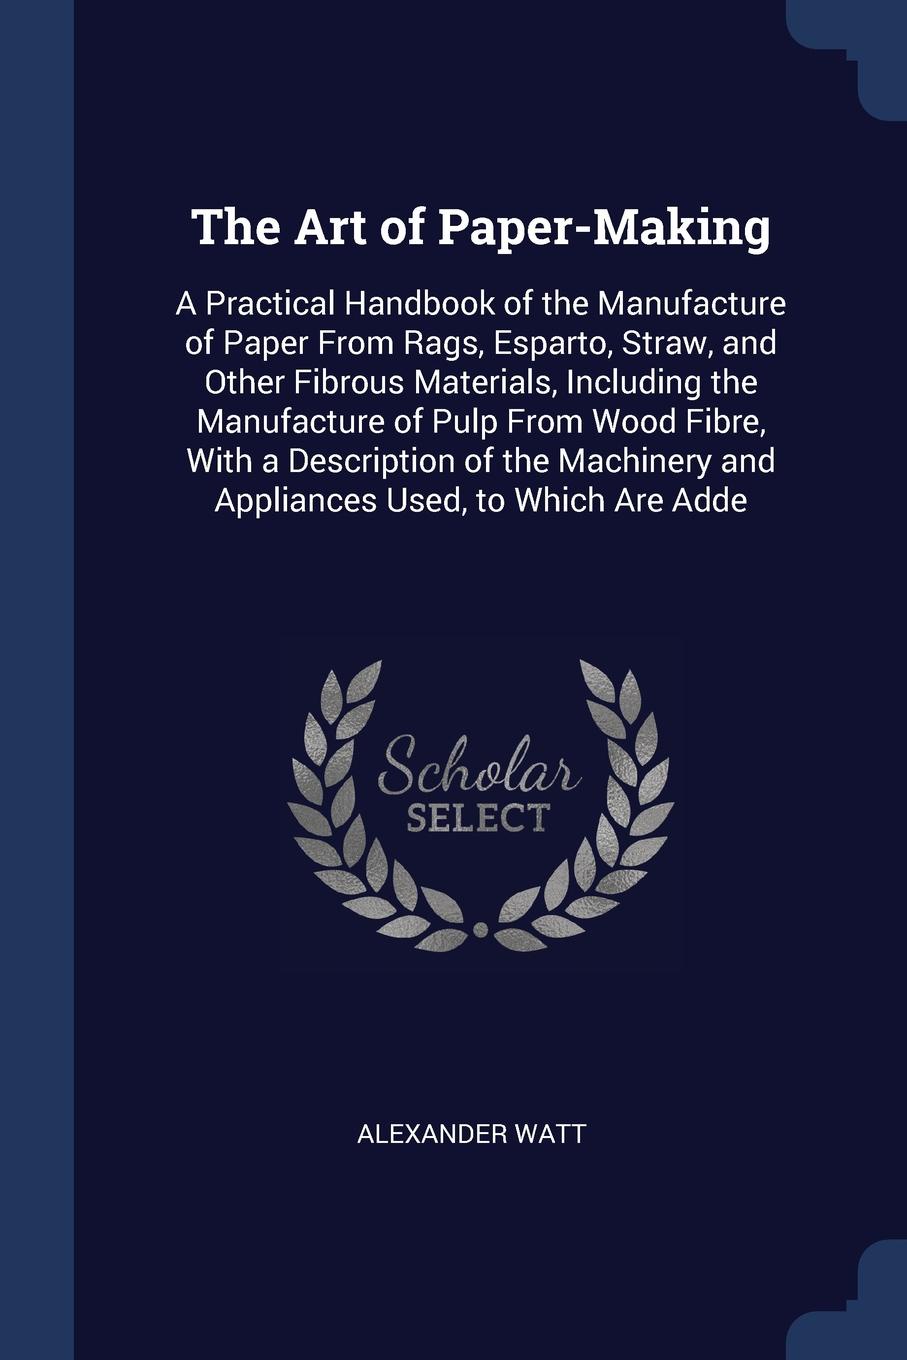 The Art of Paper-Making. A Practical Handbook of the Manufacture of Paper From Rags, Esparto, Straw, and Other Fibrous Materials, Including the Manufacture of Pulp From Wood Fibre, With a Description of the Machinery and Appliances Used, to Which ...